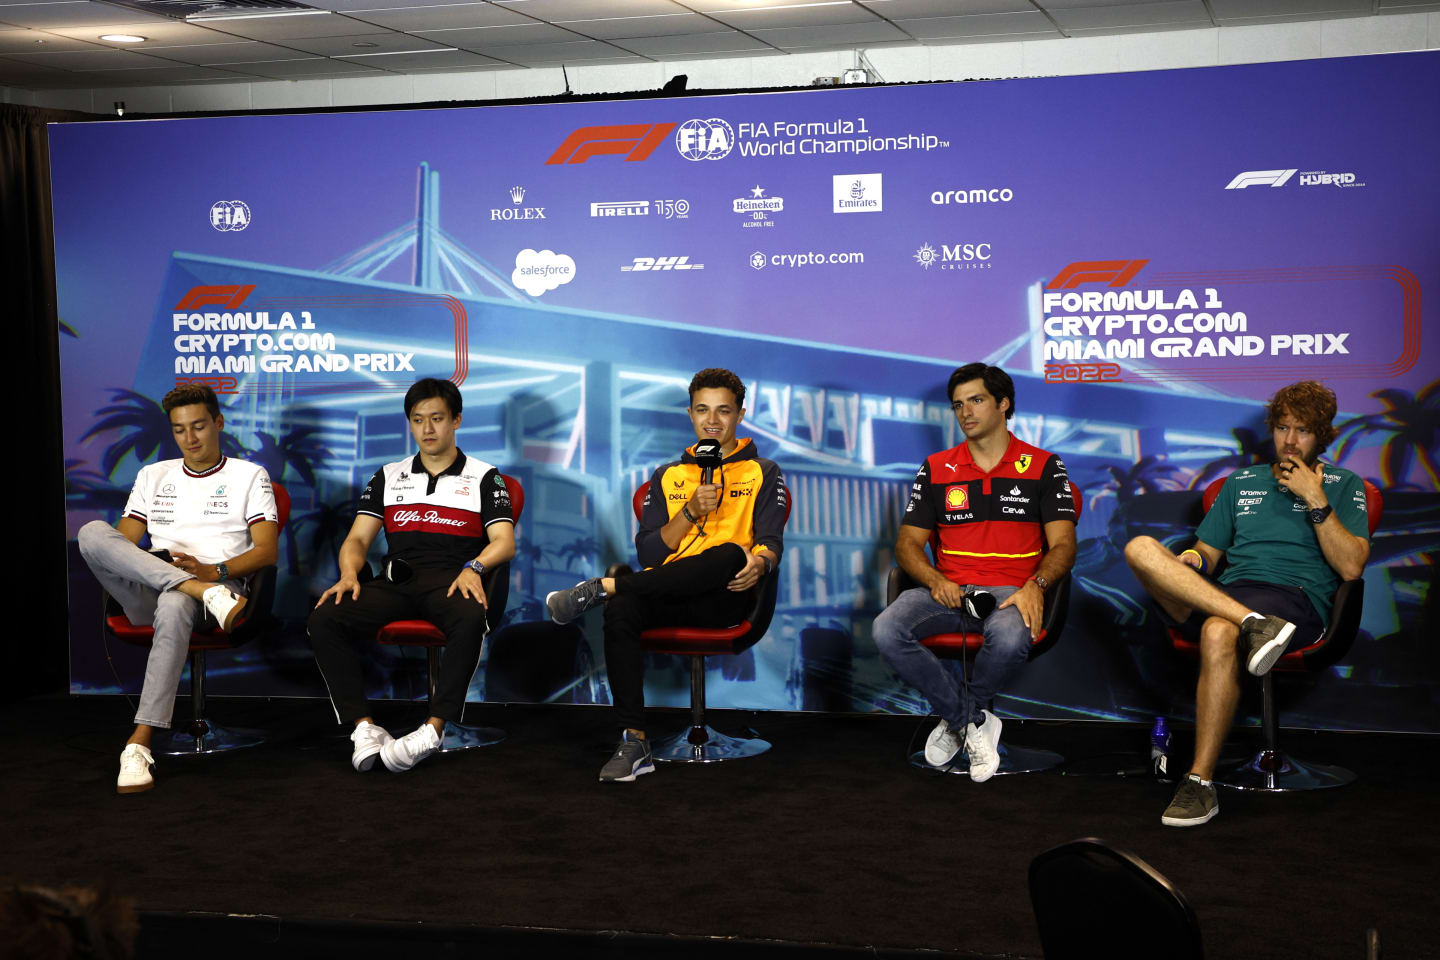 MIAMI, FLORIDA - MAY 06: (L-R) George Russell of Great Britain and Mercedes, Zhou Guanyu of China and Alfa Romeo F1, Lando Norris of Great Britain and McLaren, Carlos Sainz of Spain and Ferrari and Sebastian Vettel of Germany and Aston Martin F1 Team attend the Drivers Press Conference prior to practice ahead of the F1 Grand Prix of Miami at the Miami International Autodrome on May 06, 2022 in Miami, Florida. (Photo by Jared C. Tilton/Getty Images)